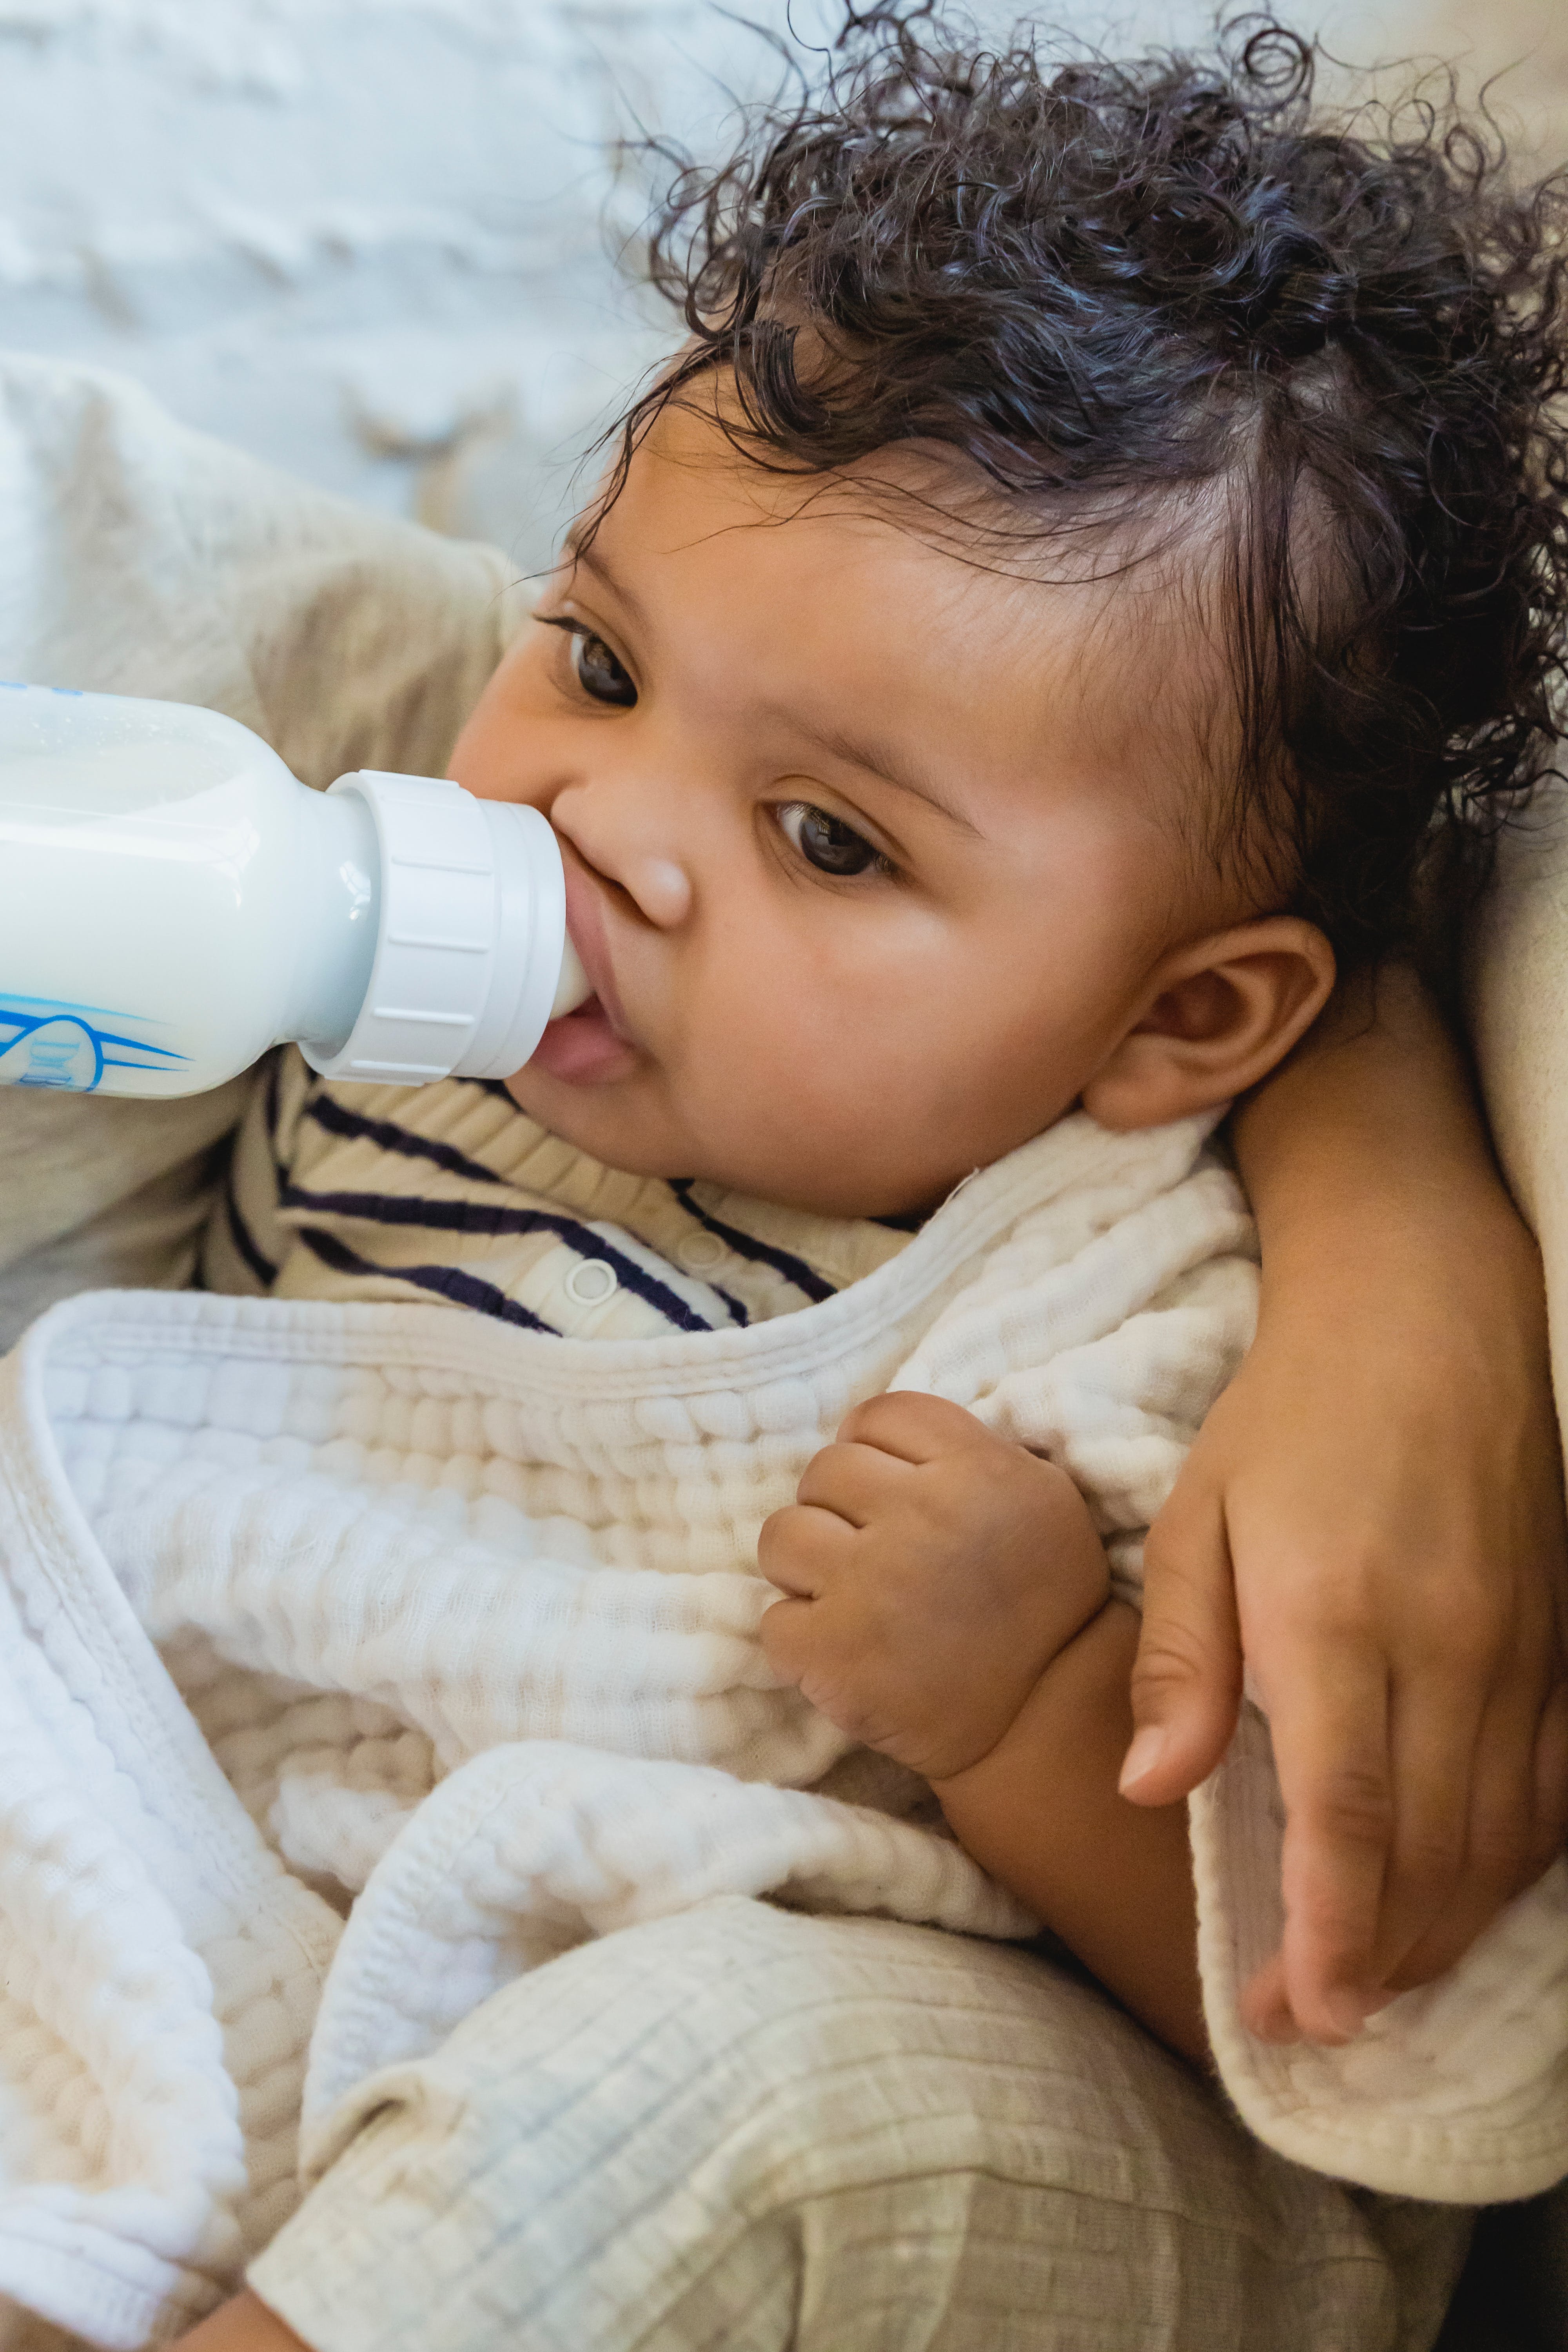 A baby suckling milk from a bottle while covered in a blanket | Source: Pexels